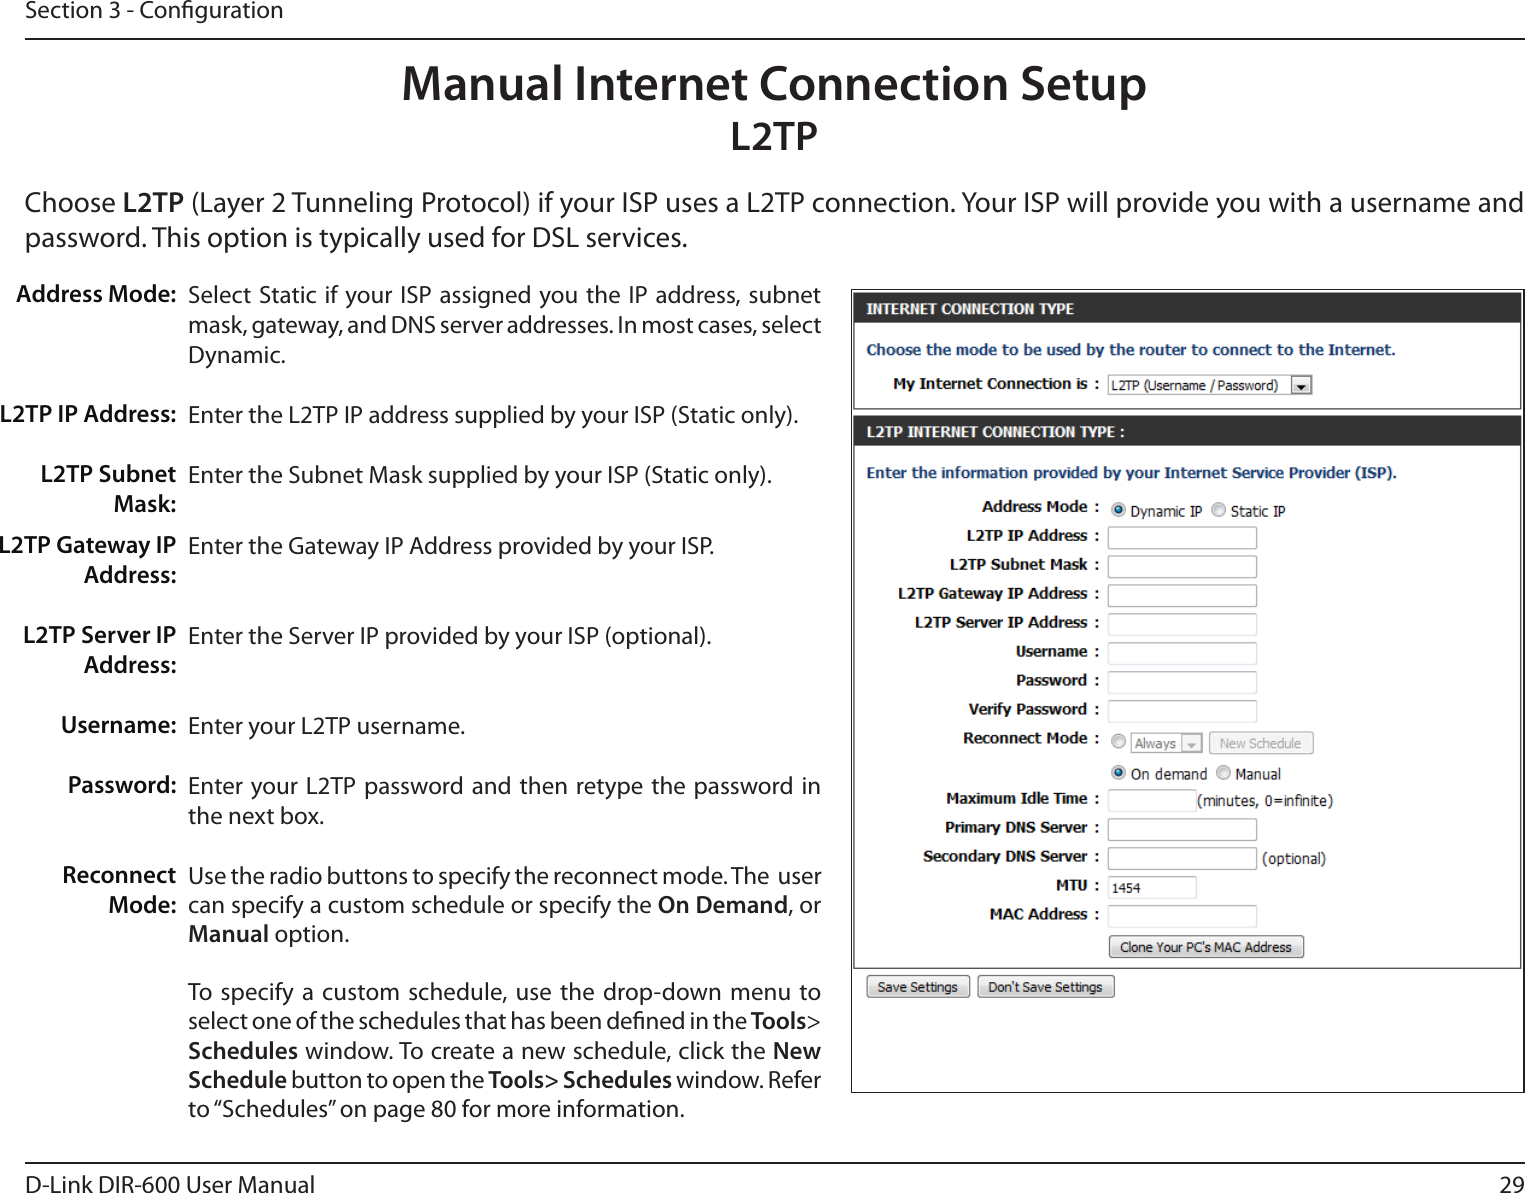 29D-Link DIR-600 User ManualSection 3 - CongurationSelect Static if your ISP assigned you the IP address, subnet mask, gateway, and DNS server addresses. In most cases, select Dynamic.Enter the L2TP IP address supplied by your ISP (Static only).Enter the Subnet Mask supplied by your ISP (Static only).Enter the Gateway IP Address provided by your ISP.Enter the Server IP provided by your ISP (optional).Enter your L2TP username.Enter your L2TP password and then retype the password in the next box.Use the radio buttons to specify the reconnect mode. The  user can specify a custom schedule or specify the On Demand, or Manual option.To specify  a custom  schedule, use the  drop-down menu to select one of the schedules that has been dened in the Tools&gt; Schedules window. To create a new schedule, click the New Schedule button to open the Tools&gt; Schedules window. Refer to “Schedules” on page 80 for more information.Address Mode:L2TP IP Address:L2TP Subnet Mask:Manual Internet Connection SetupL2TPChoose L2TP (Layer 2 Tunneling Protocol) if your ISP uses a L2TP connection. Your ISP will provide you with a username and password. This option is typically used for DSL services. L2TP Gateway IP Address:L2TP Server IP Address:Username:Password:Reconnect Mode: